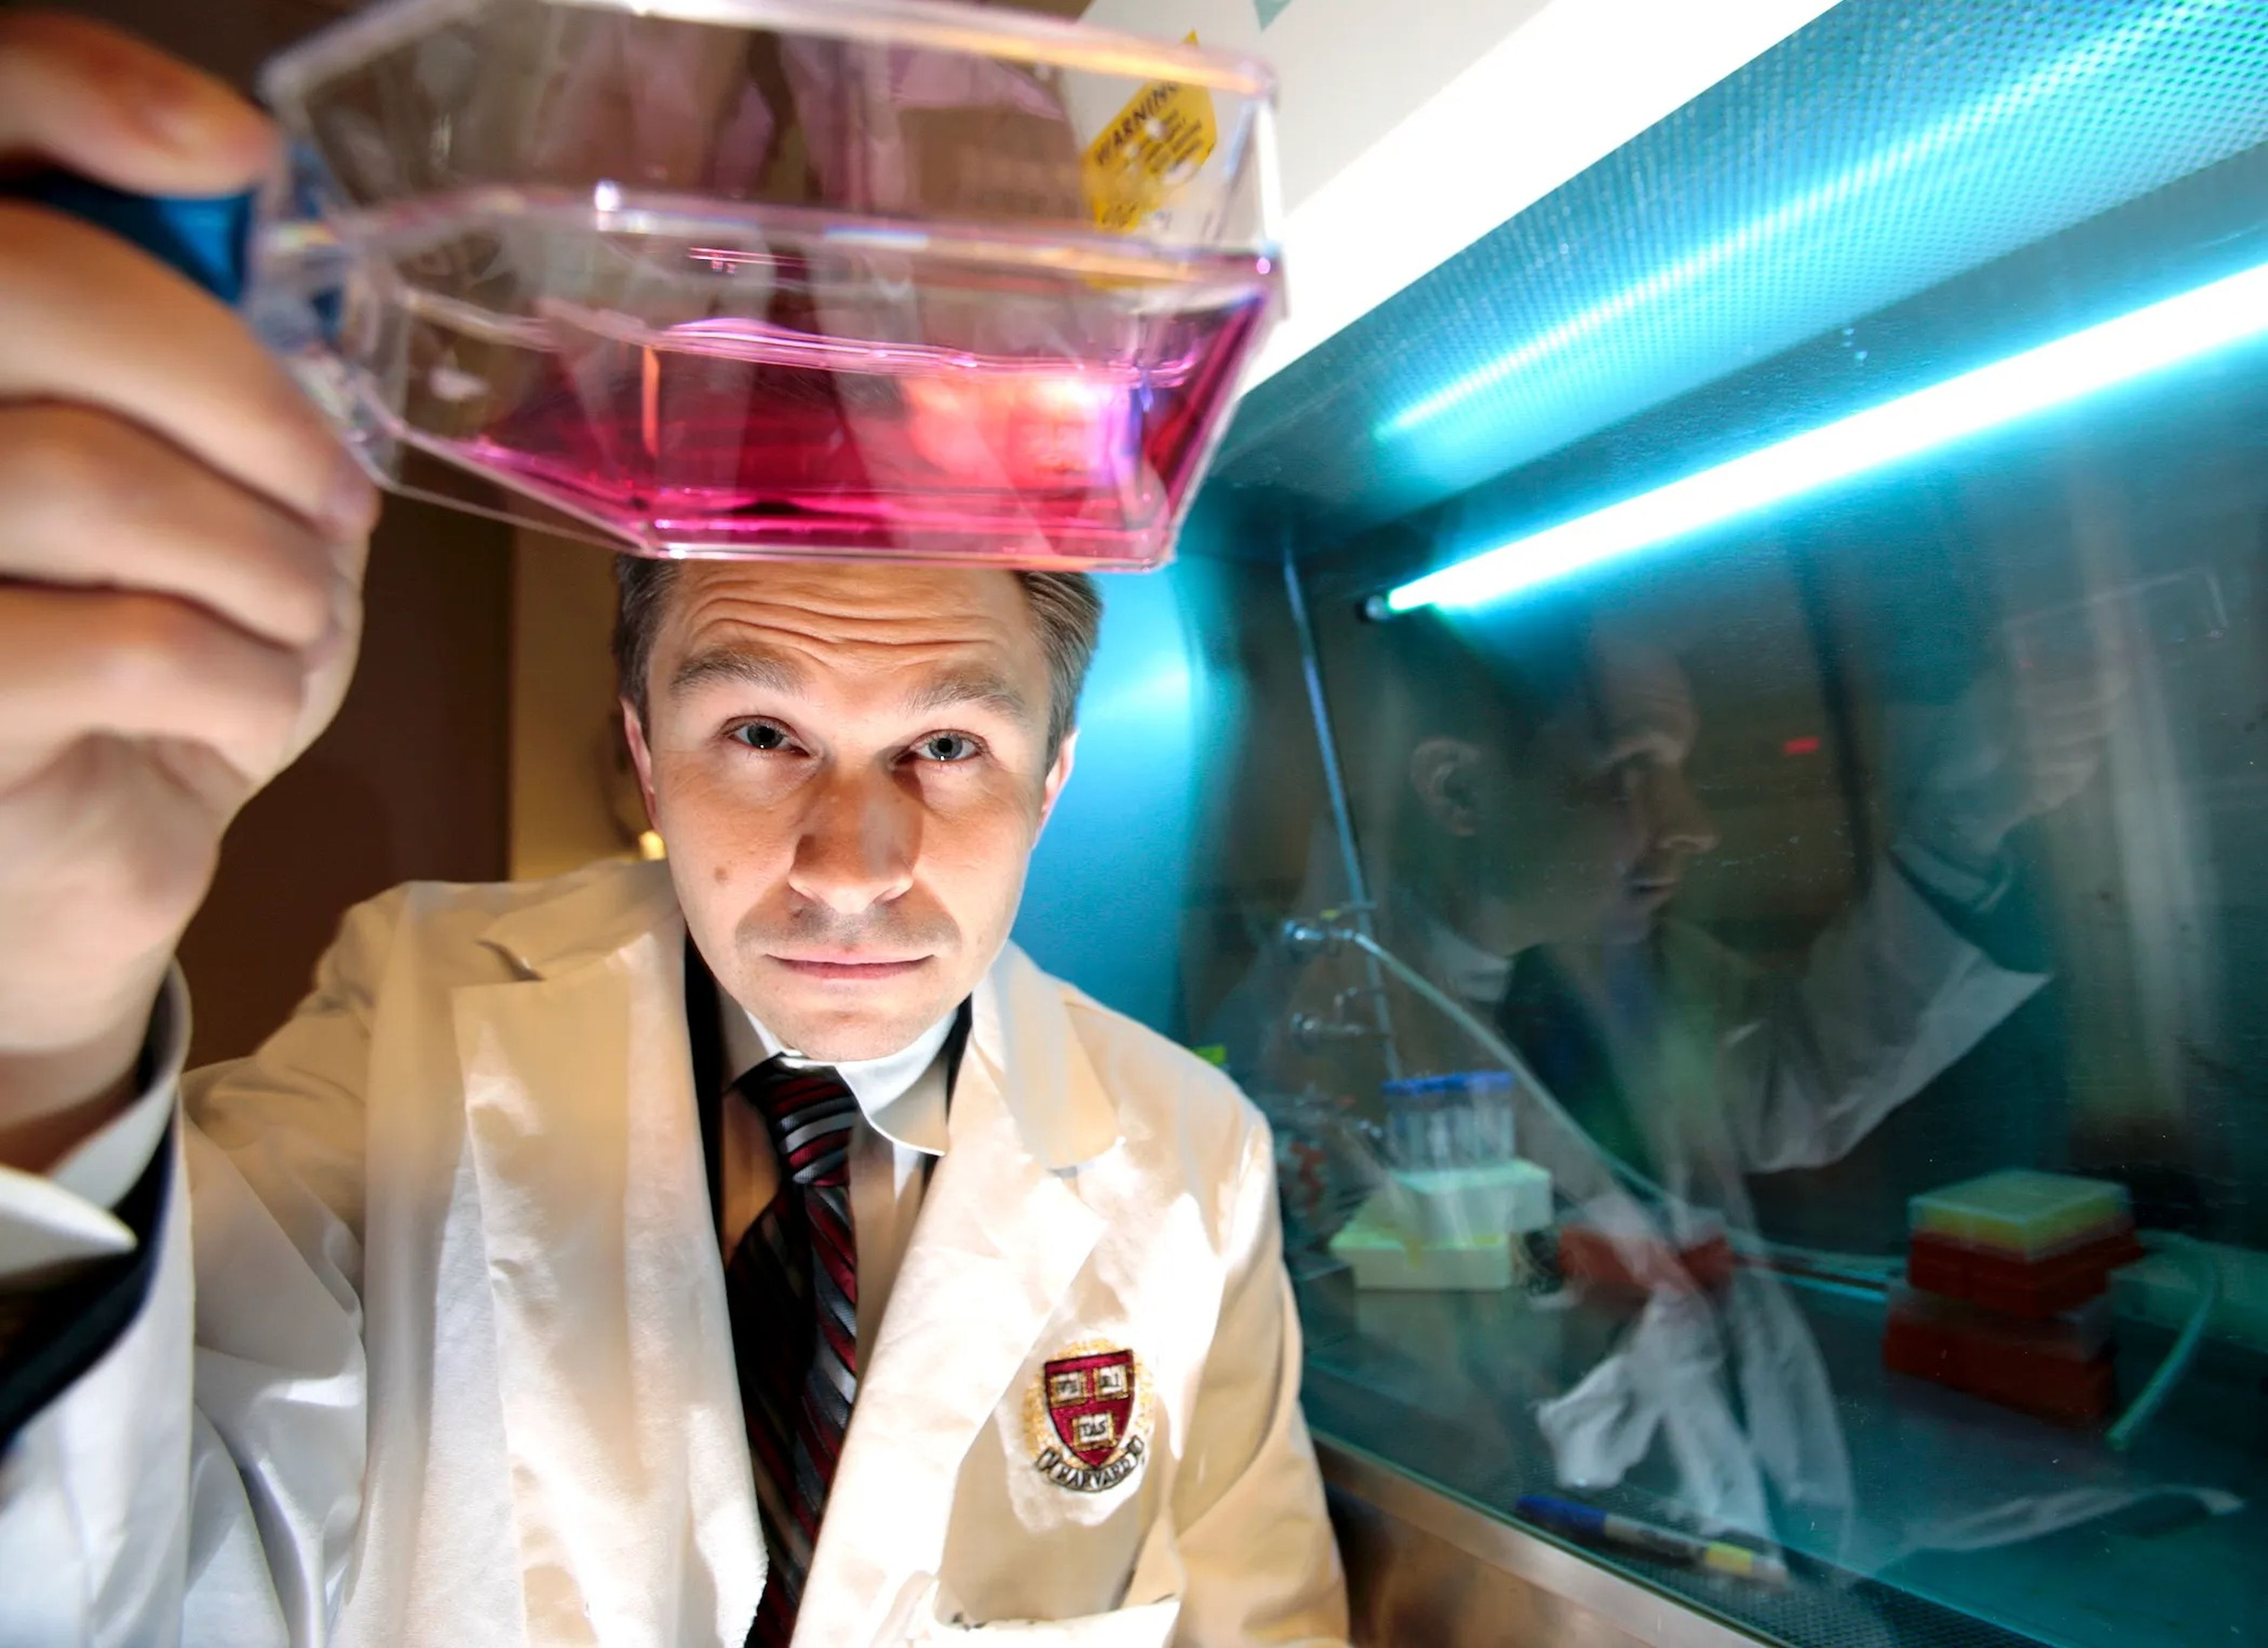 David Sinclair wearing a lab coat while he inspects a clear flask of pink liquid in his lab.